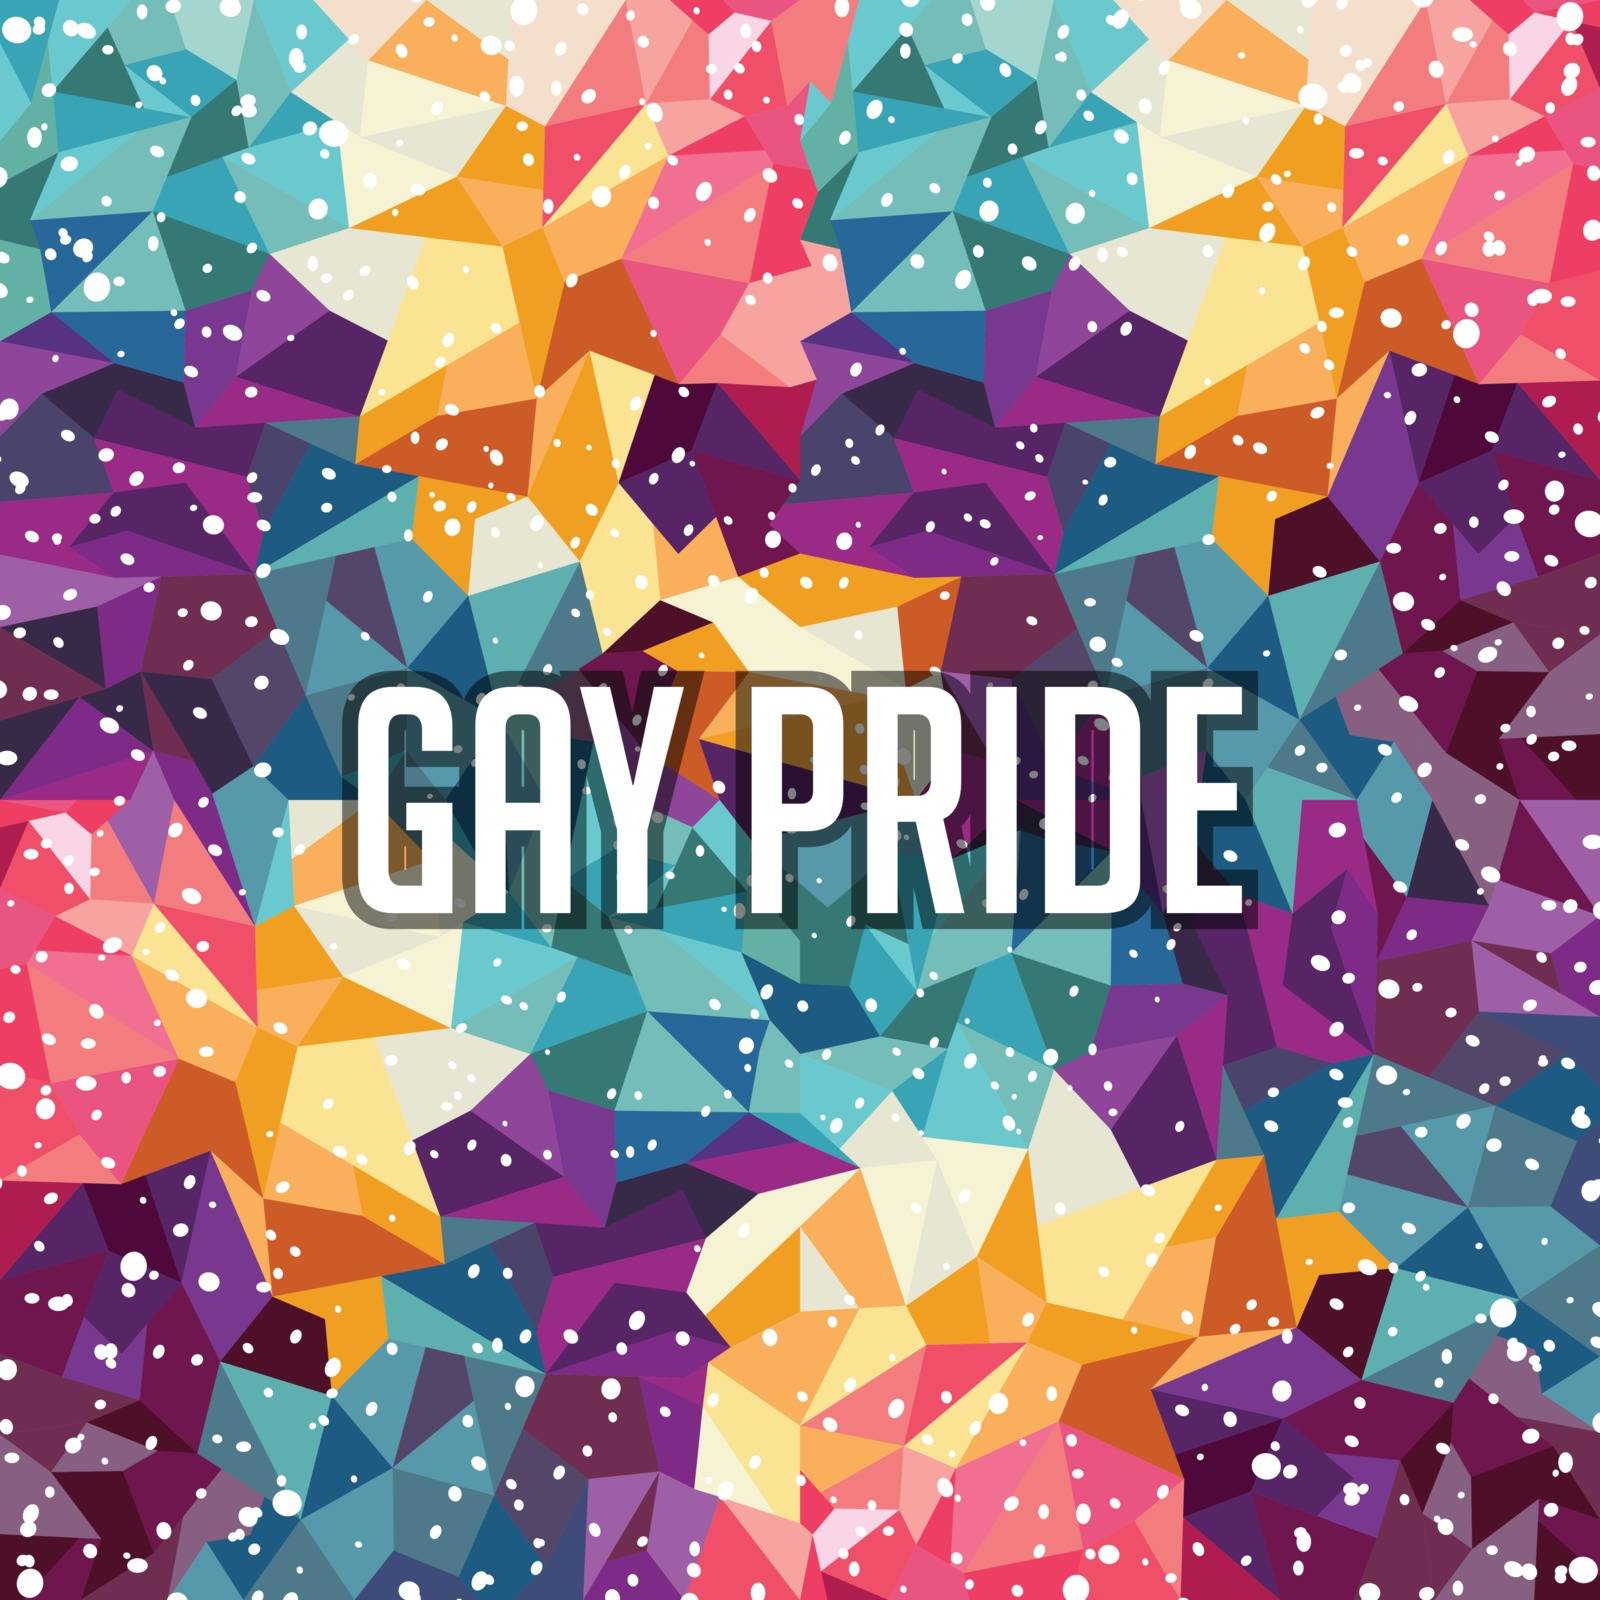 gay pride campaign freedom human rights vector art